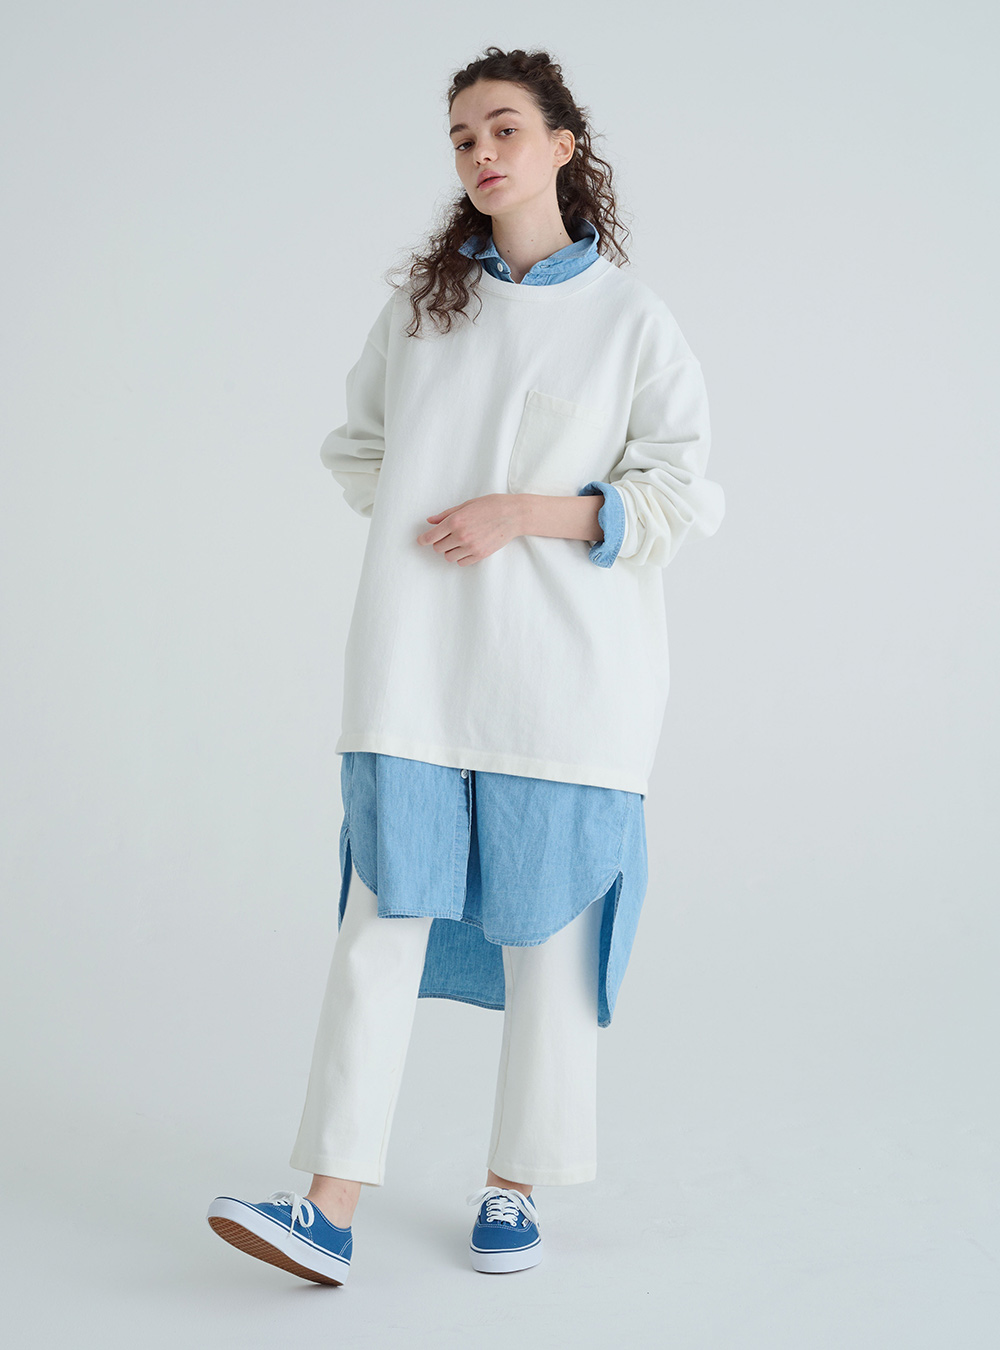 2023 SPRING&SUMMER 2nd Delivery LOOK BOOK| BLUE BLUE（ブルーブルー ...